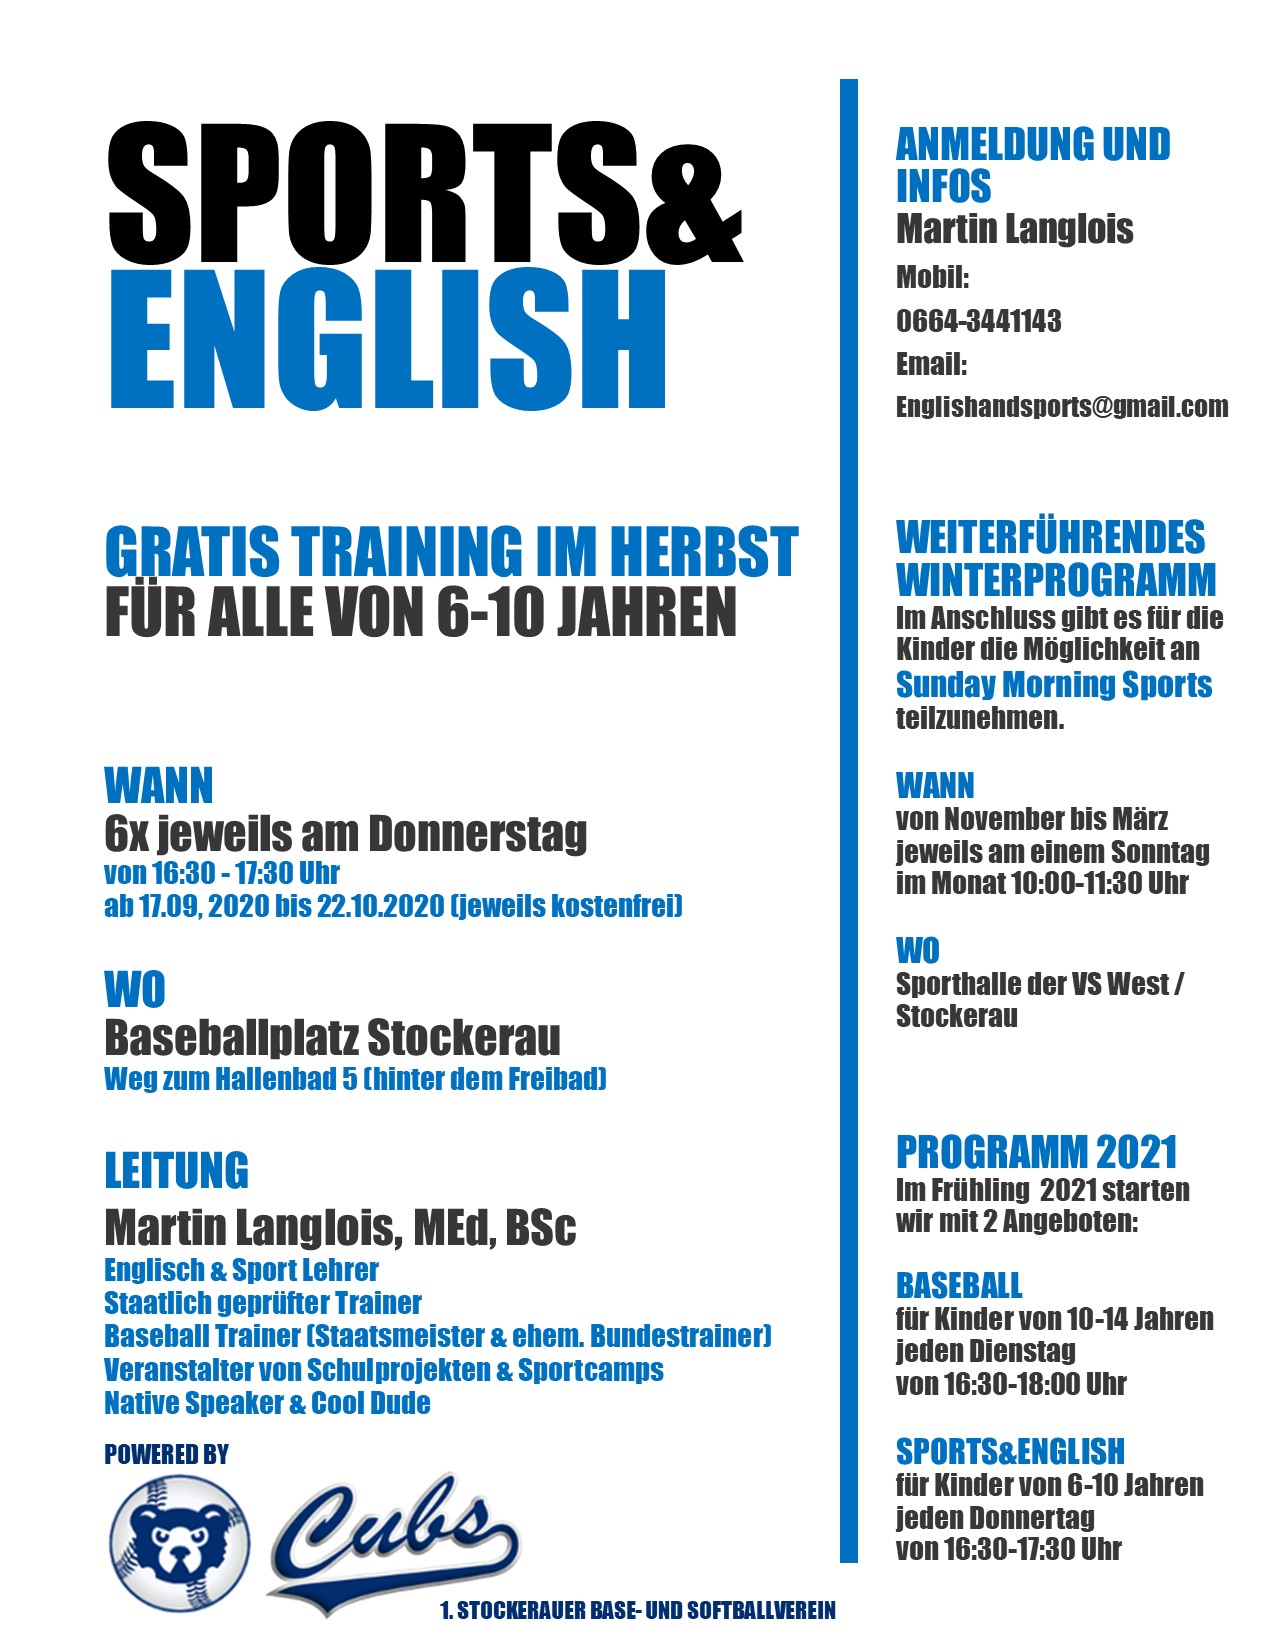 SPORTS&ENGLISH HERBST 2020